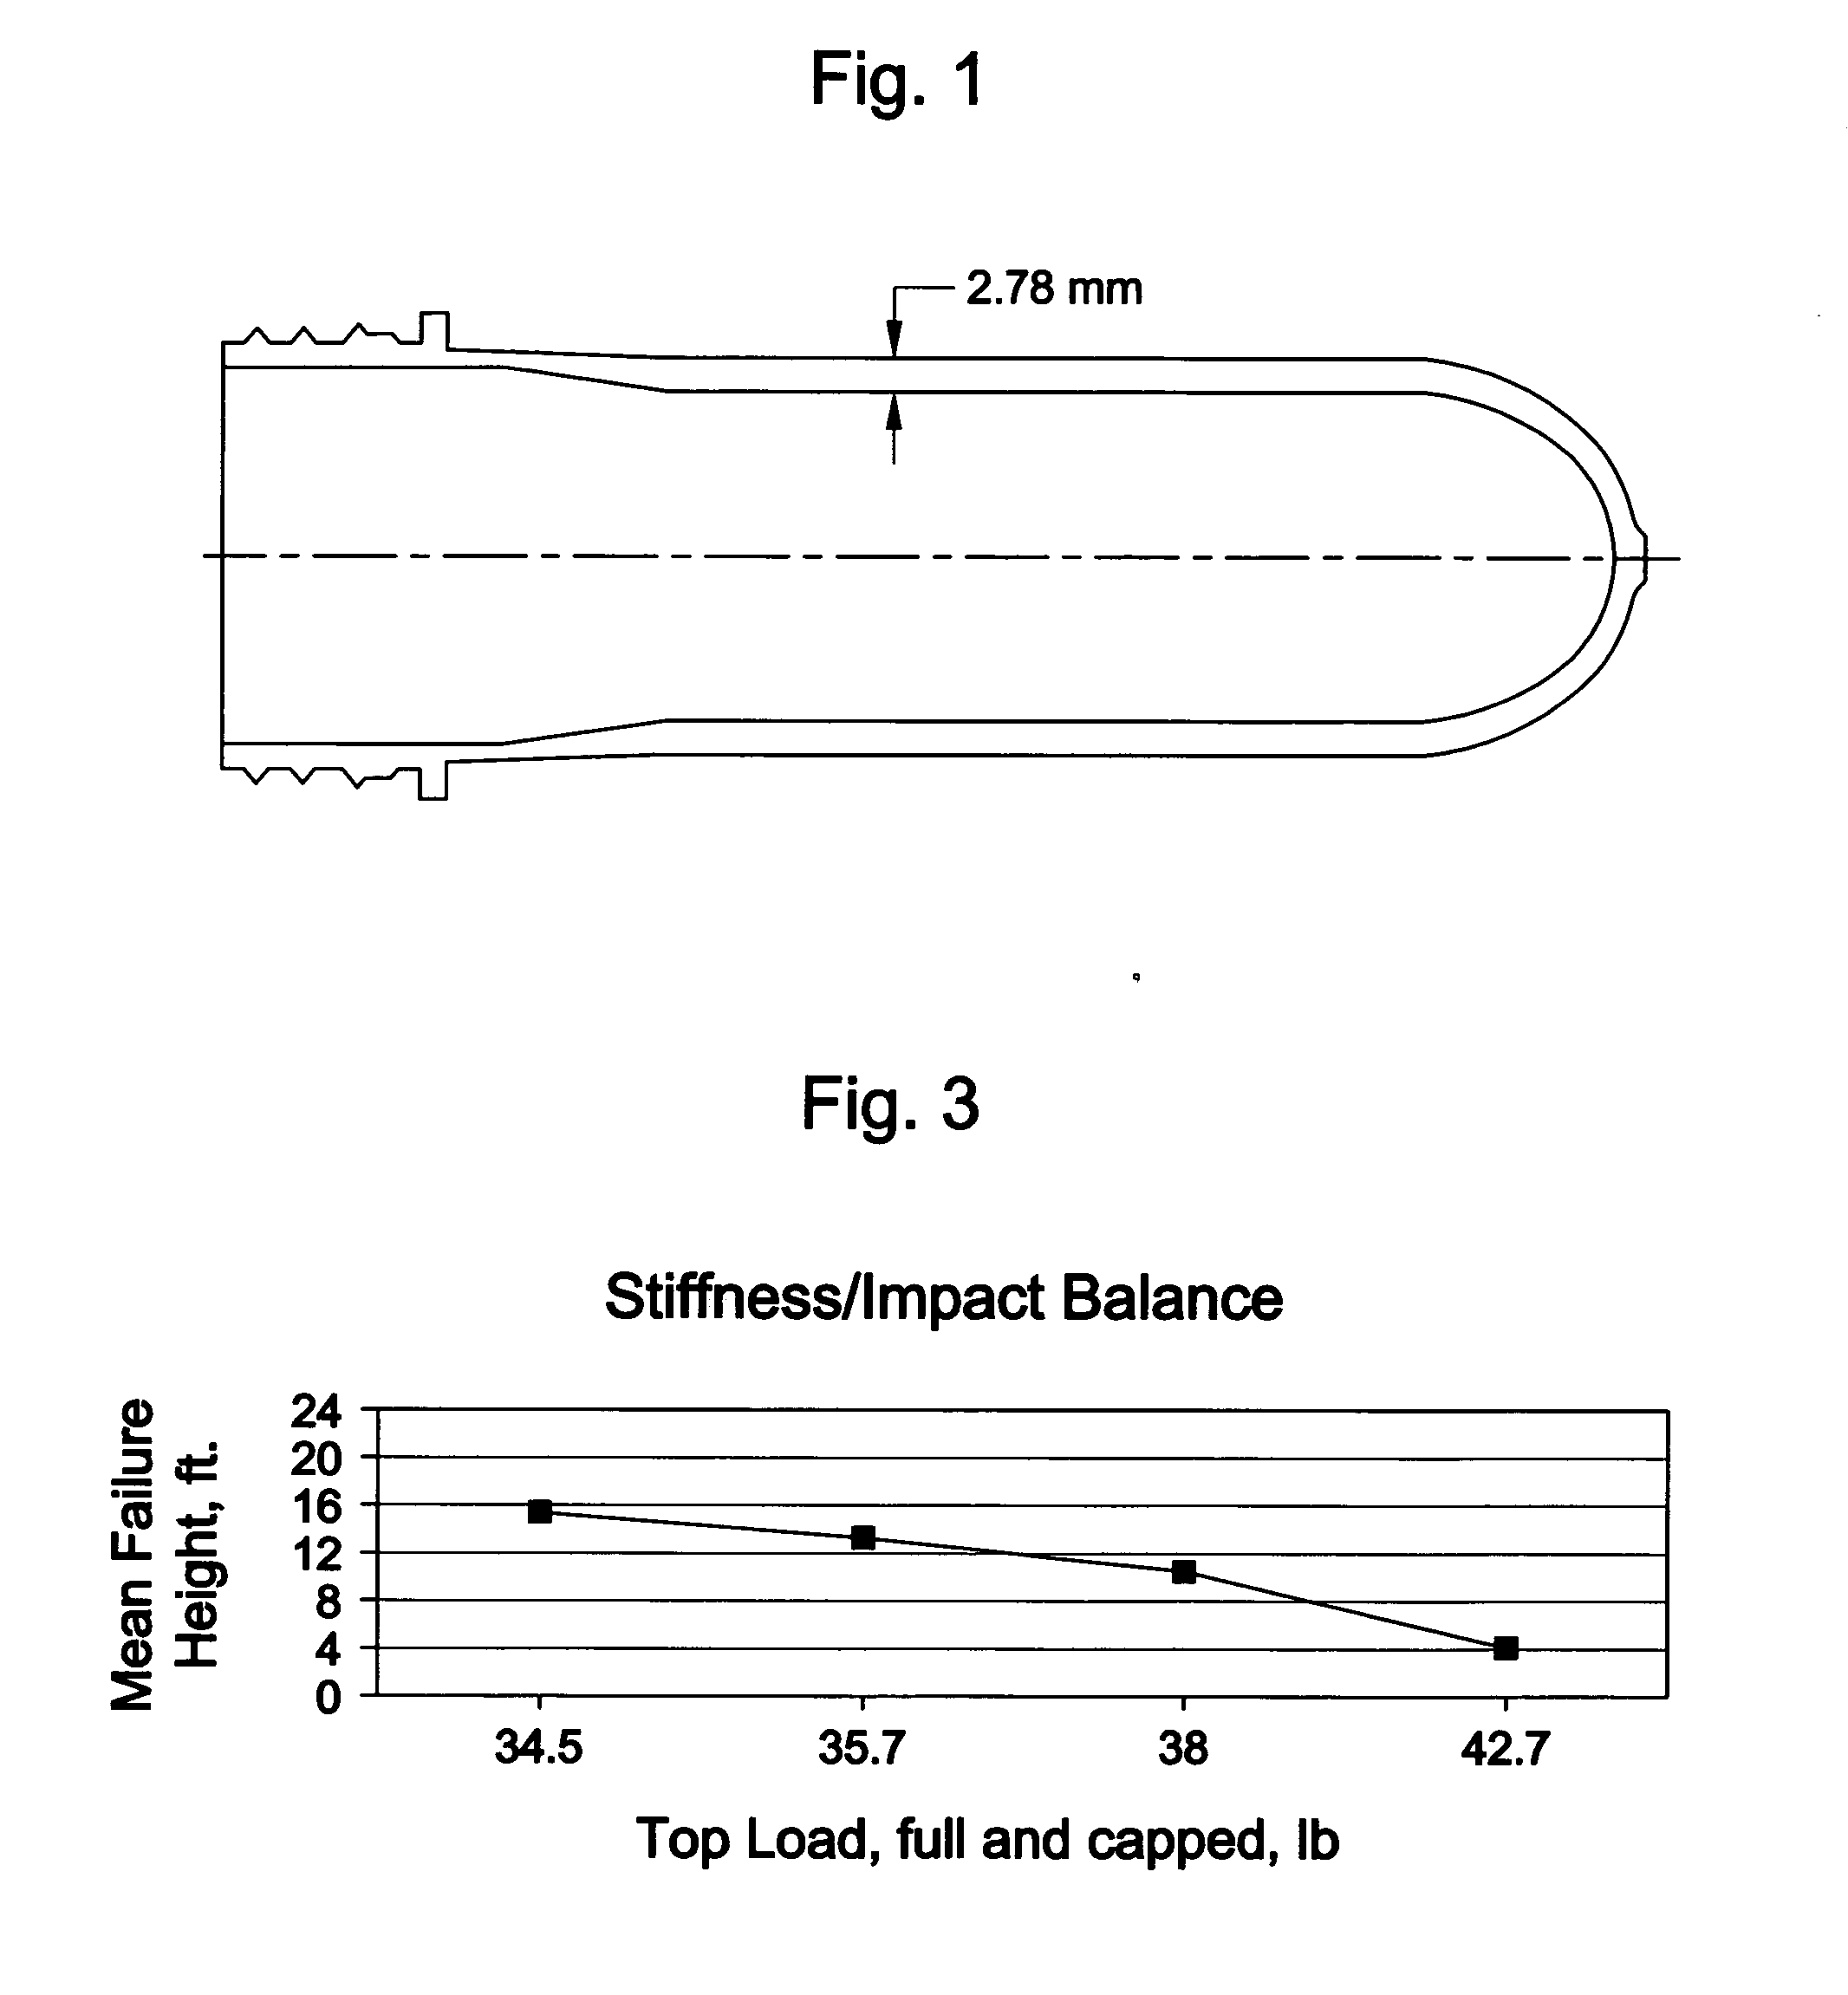 Methods for stretch blow molding polymeric articles